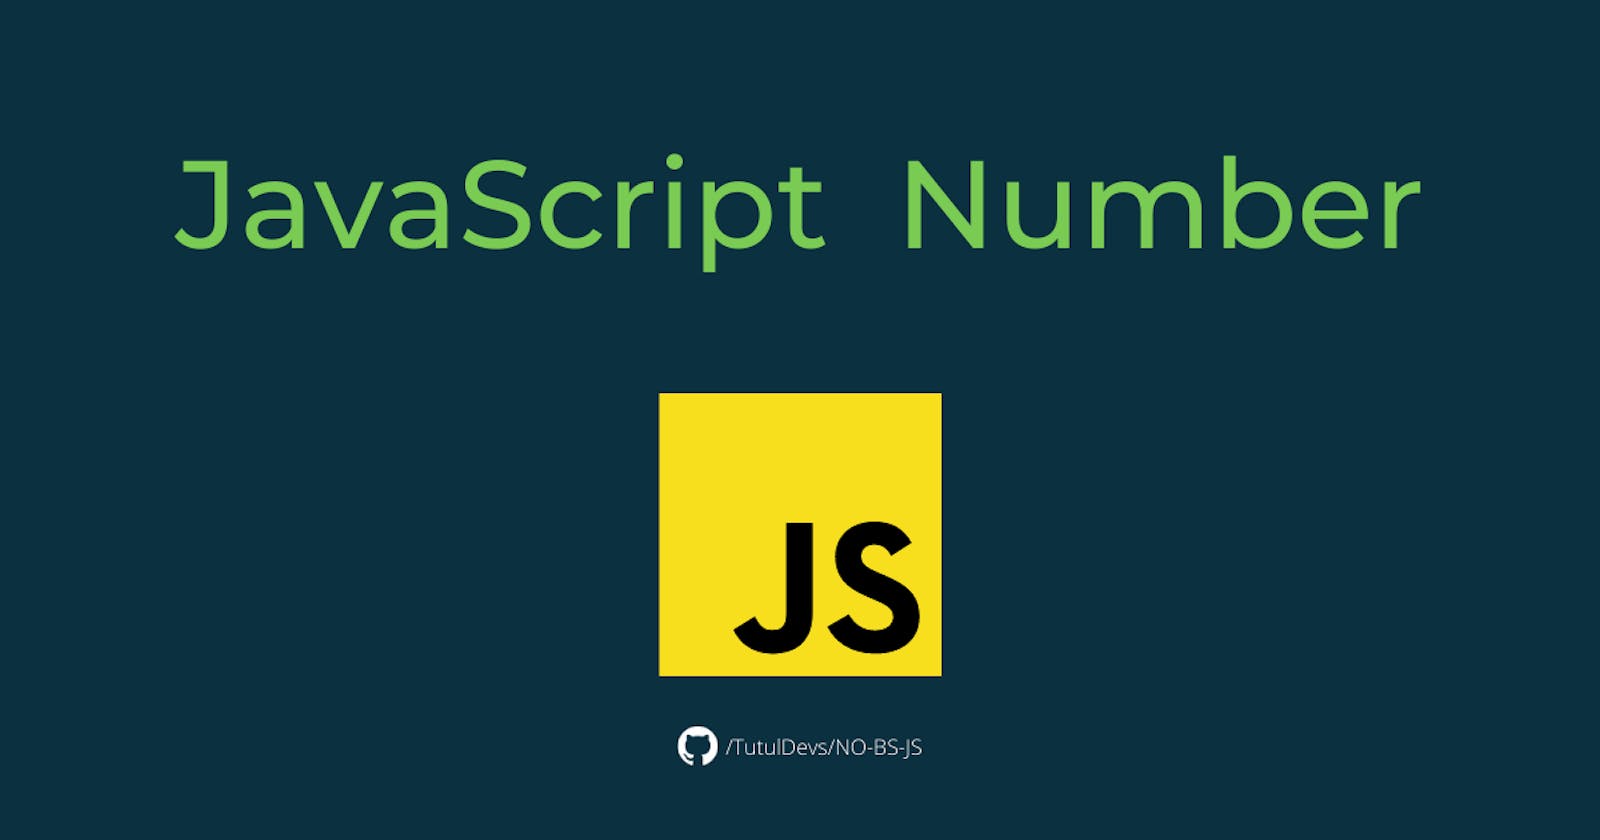 My Notes on JavaScript Number